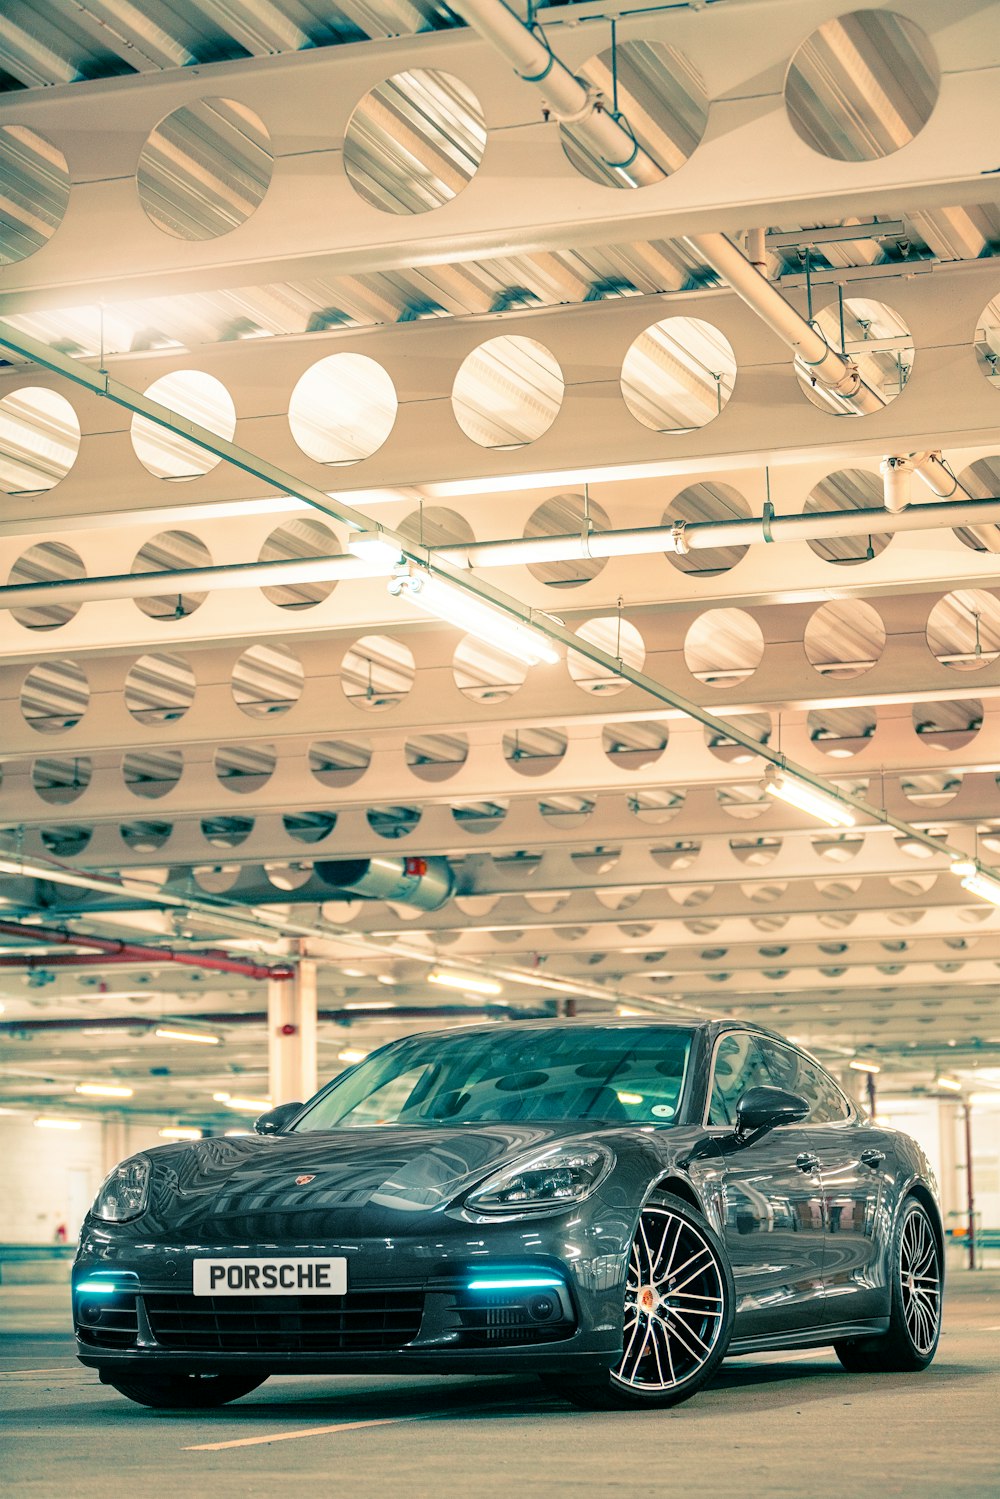 Panamera Pictures | Download Free Images on Unsplash